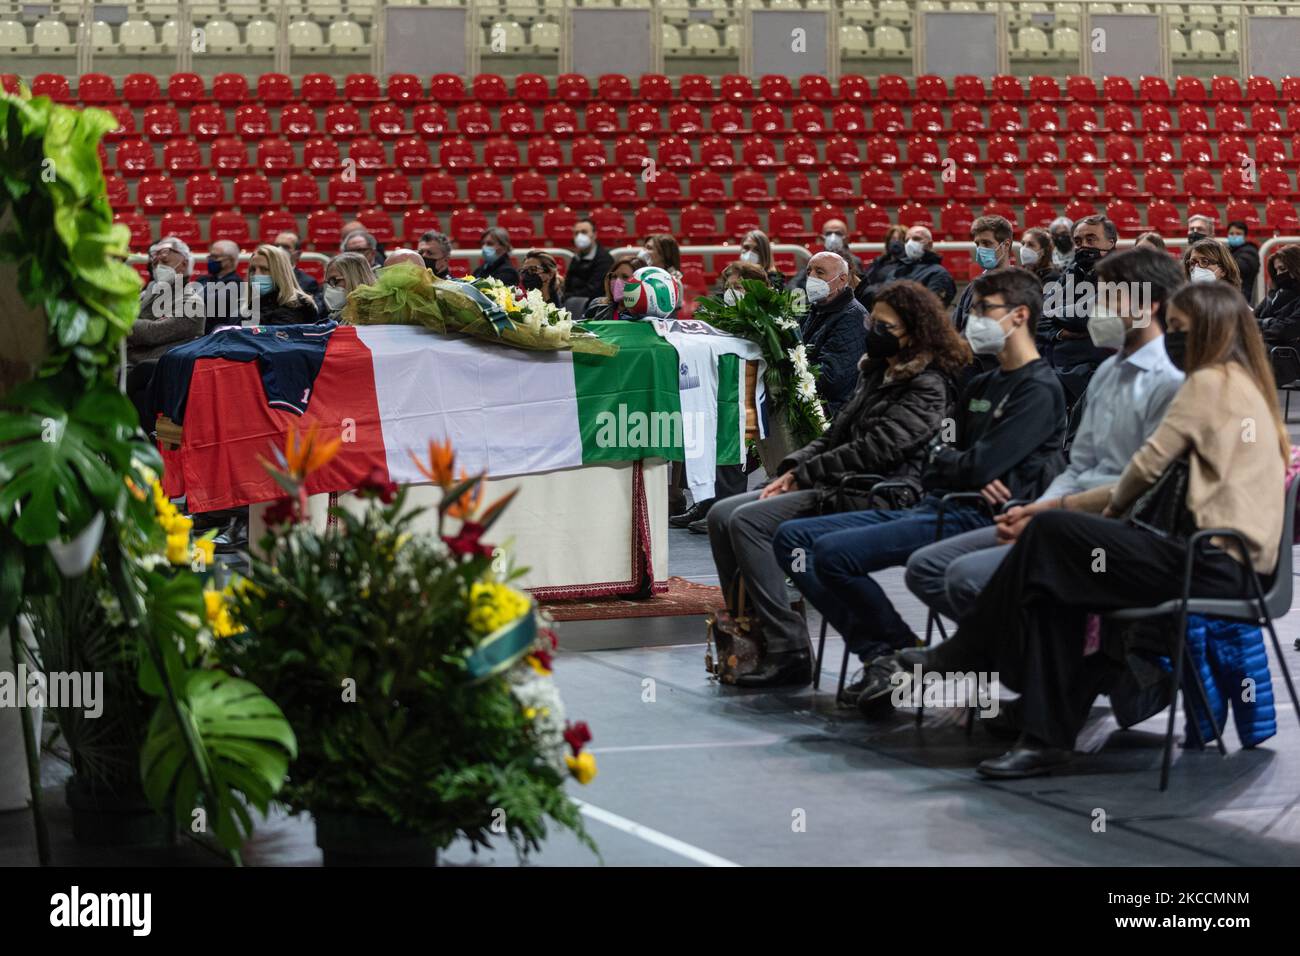 In the picture a moment of Michele Pasinato's funeral inside the Kioene Arena in Padua. To the right of the coffin the family of Pasinato with his wife Silvia and their children Giorgio and Edoardo. The funeral of the volleyball player of the Italian national team, Michele Pasinato, struck down at the age of 52 by a tumor, took place today in Padua at the Kioene Arena. His teammates Martinelli, Zorzi, Lucchetta and Velasco are present. The city of Padua, where he coached the youth volleyball team, has tightened around his memory. On April 12, 2021, in Padova, Italy. (Photo by Roberto Silvino/N Stock Photo